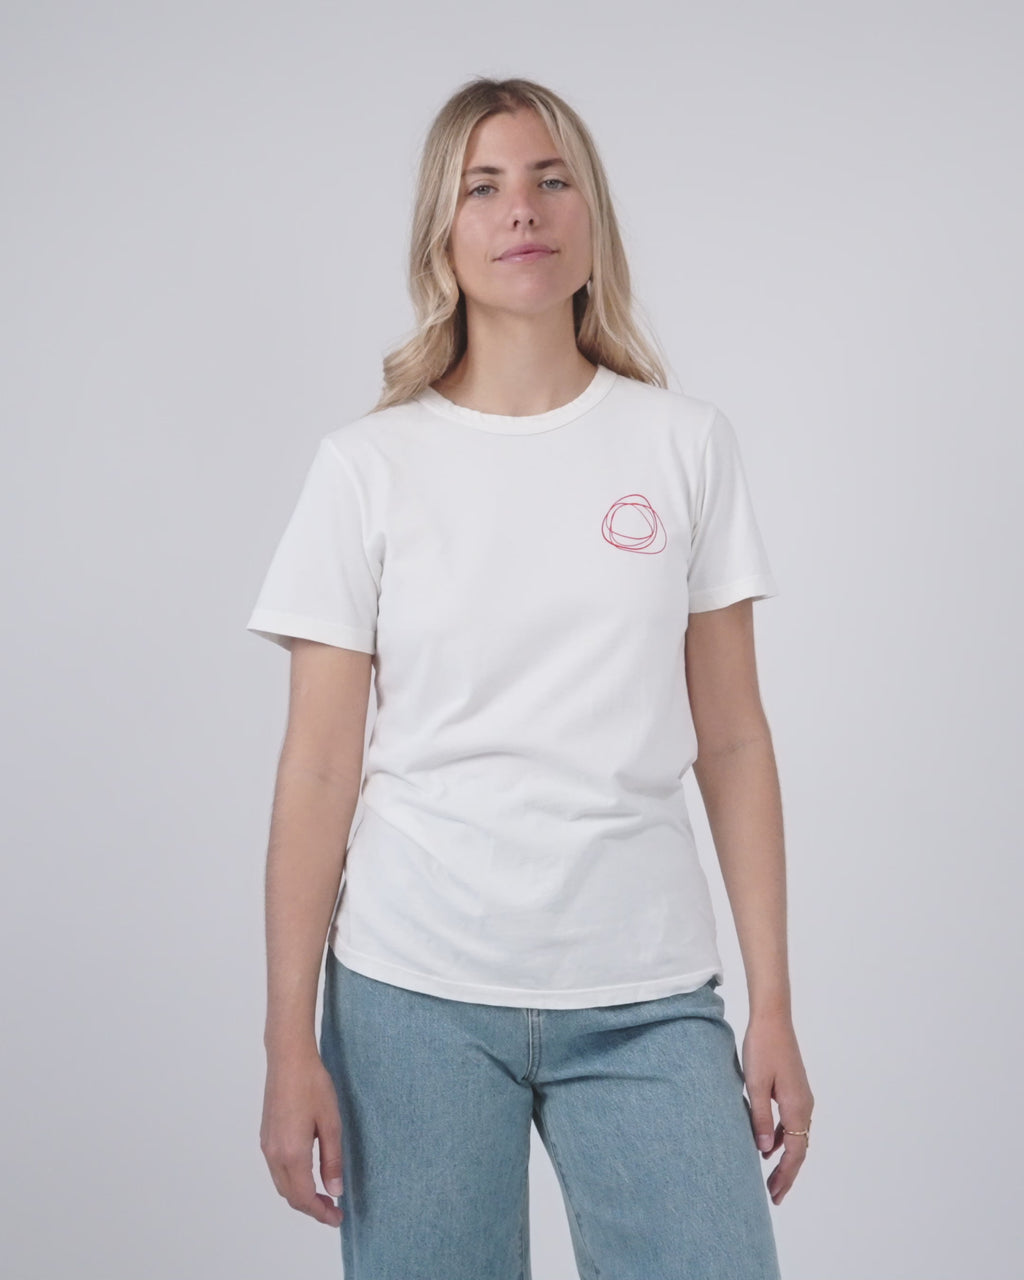 Imperfects - 1-800-SPEEDLOG Tee in Vintage White - Womens